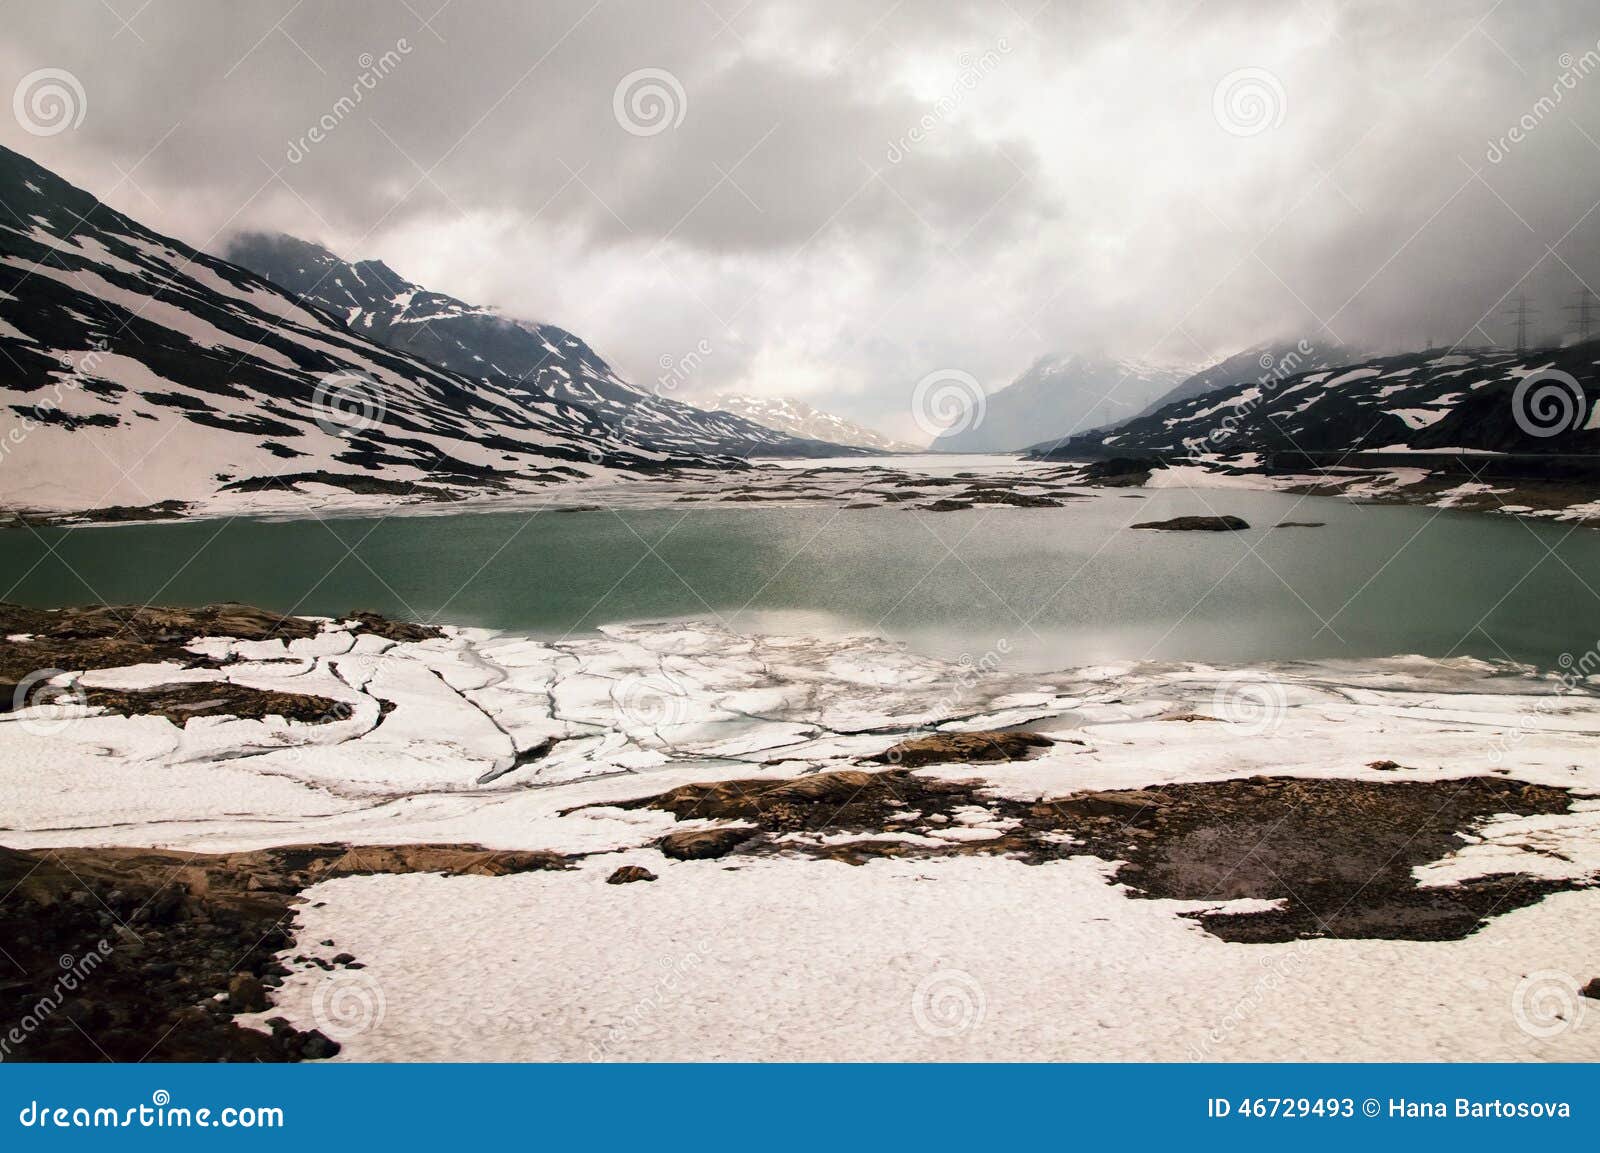 Lago Bianco with Snowy Mountains and Green Water in Lake, Bernina Pass, Switzerland Stock Image - Image of green: 46729493